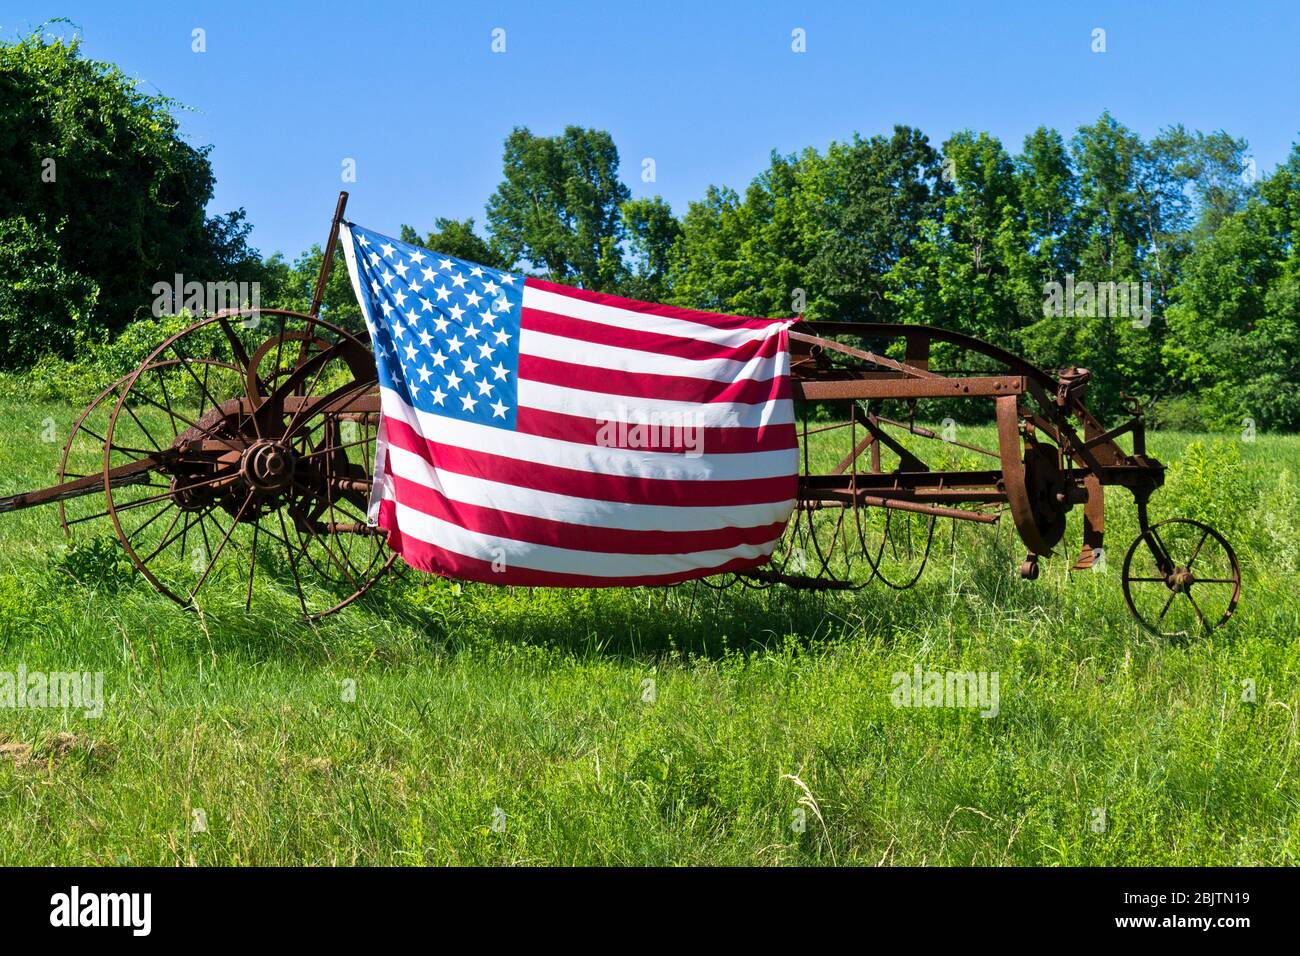 An American flag attached to farm equipment in a field in Barre, Massachusetts Stock Photo